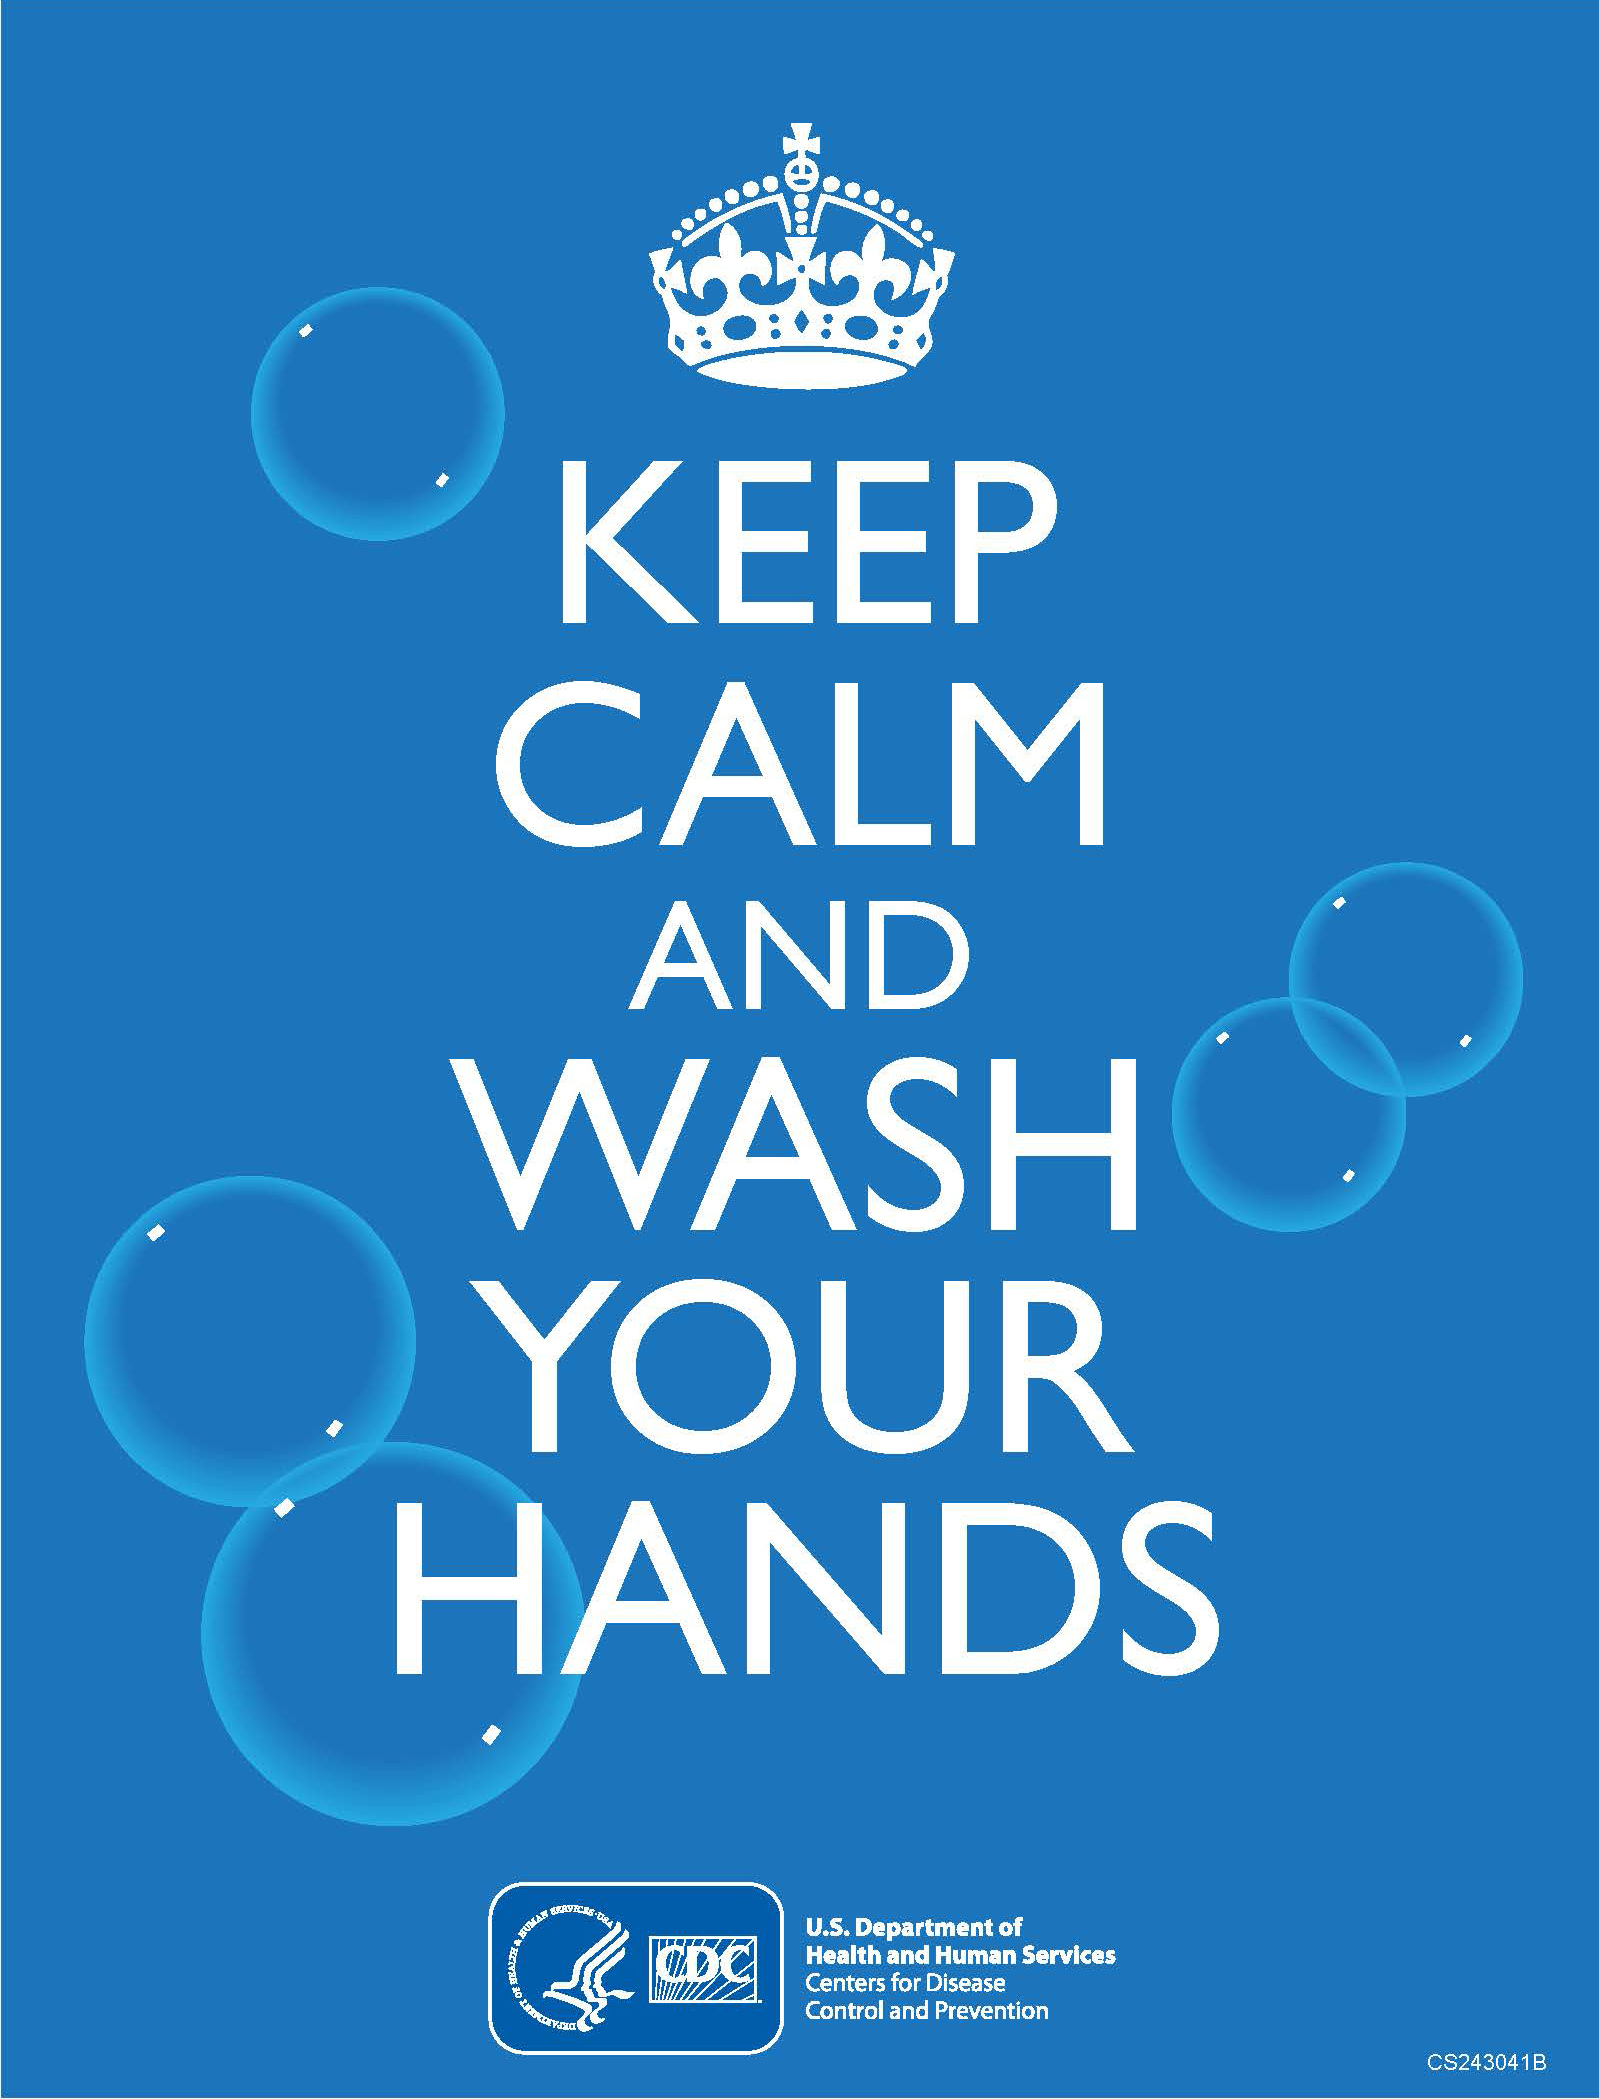 Keep calm and watch your hands poster from the CDC